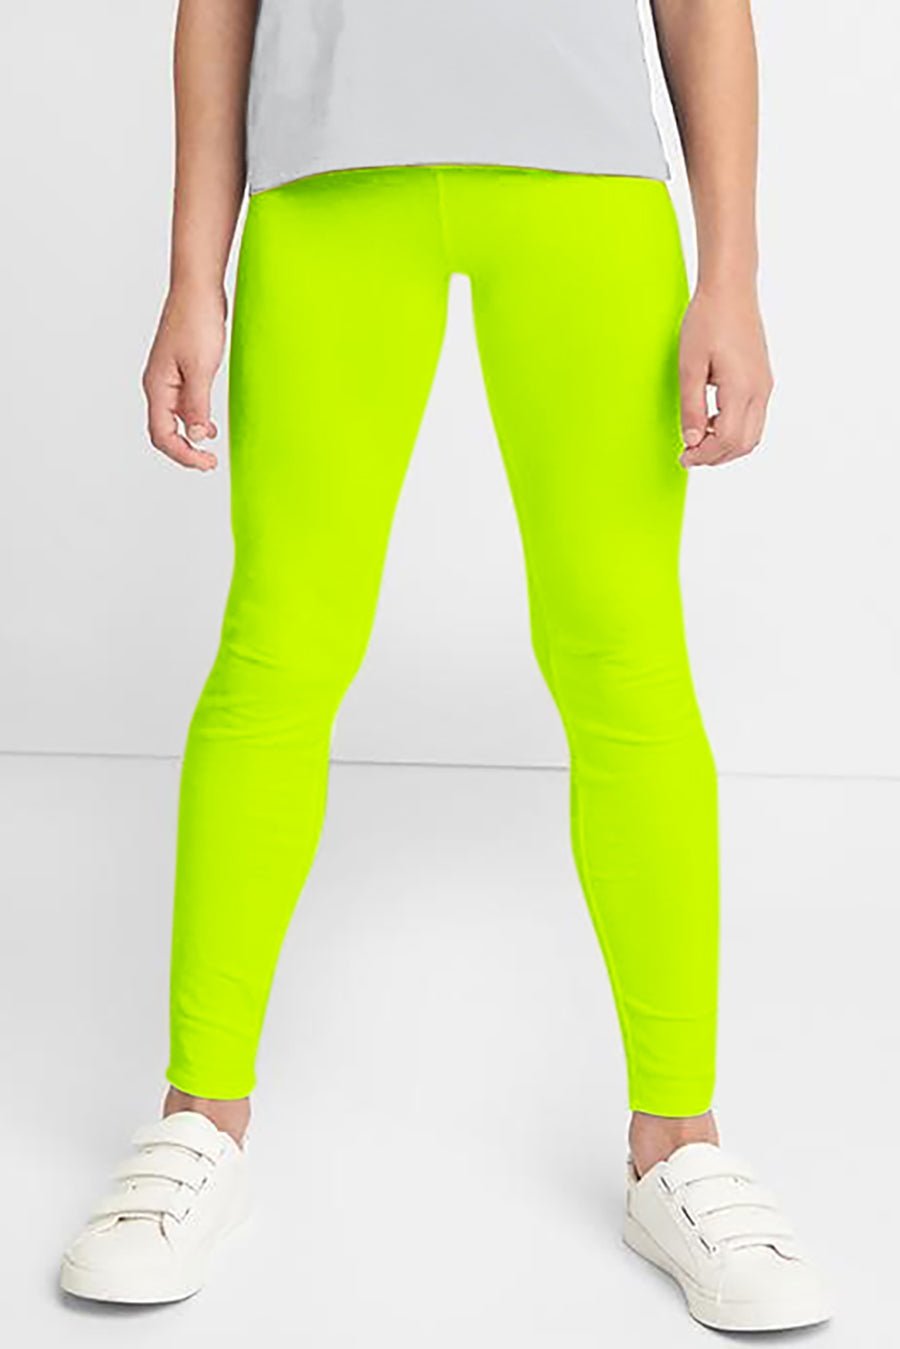 Neon Yellow UV 50+ Lucy Bright Cute Stretchy Leggings - Kids - Pineapple Clothing